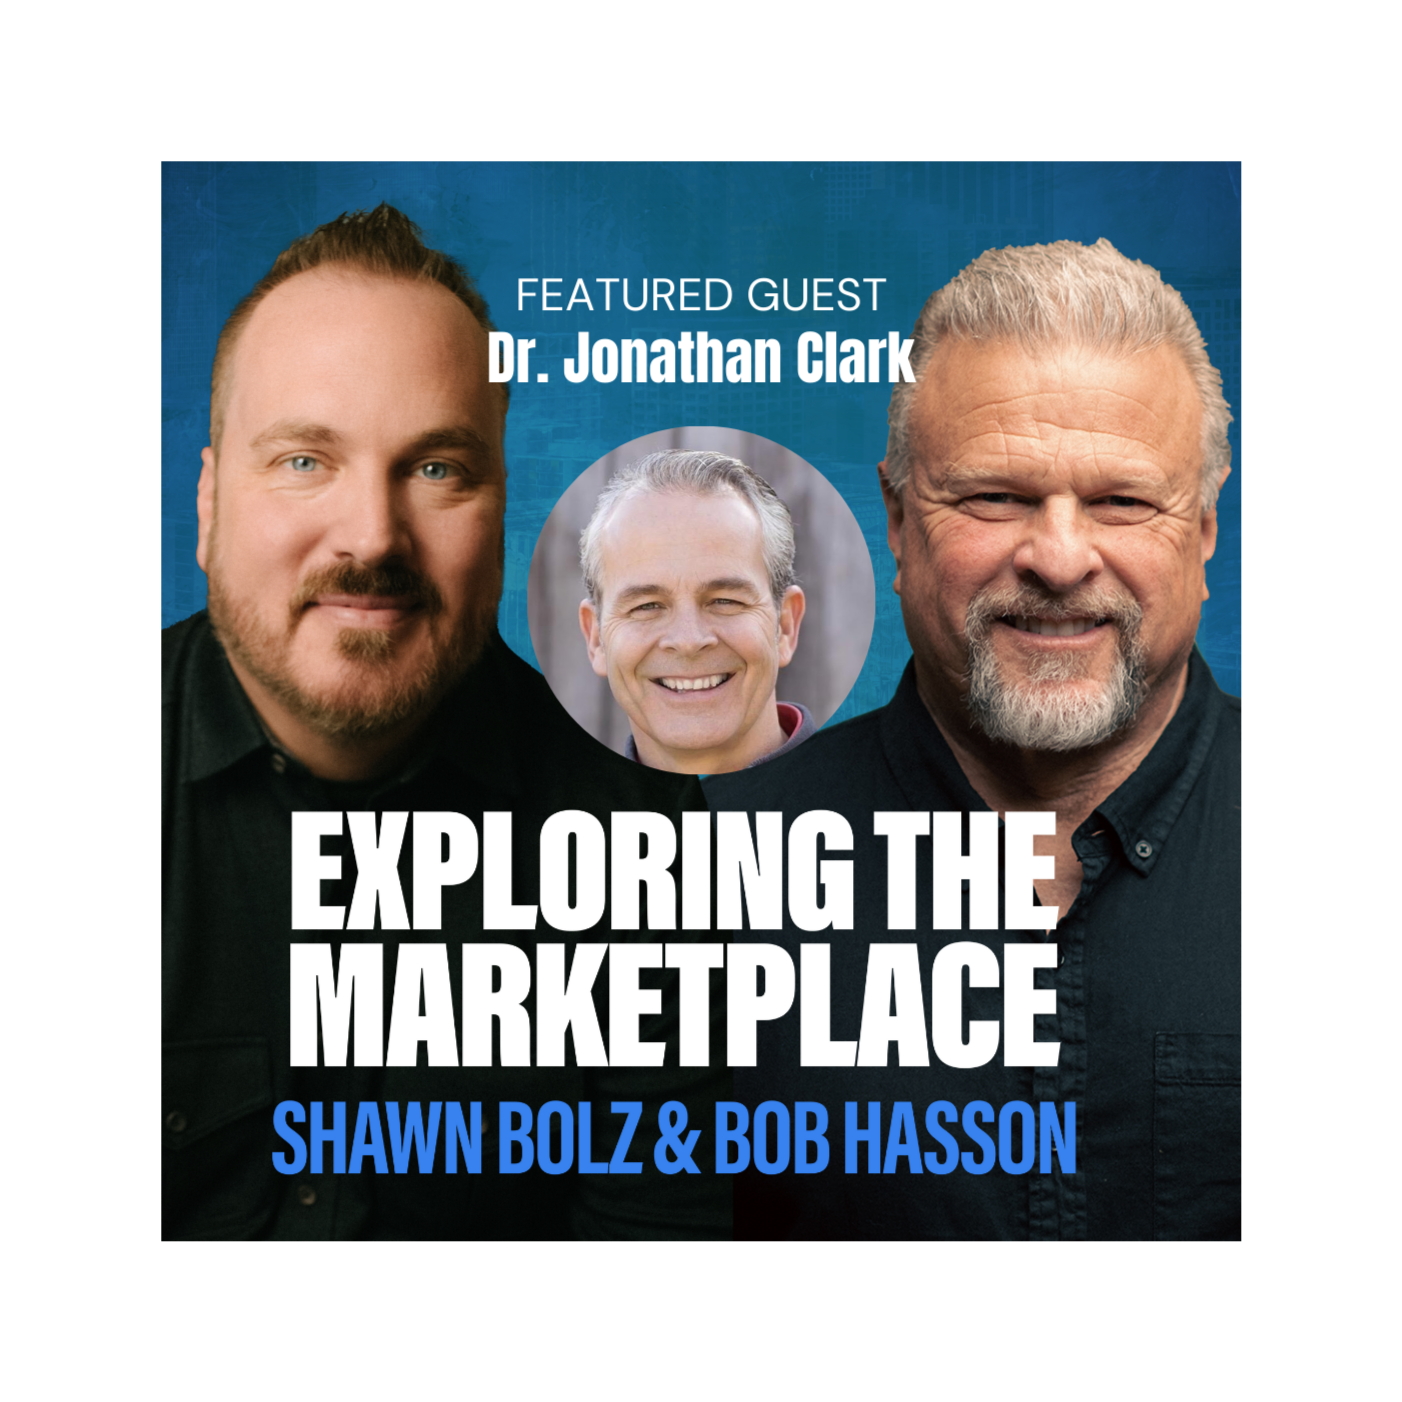 Faith, Healing, and the Power of God in the Medical Field with Dr. Jonathan Clark on Exploring the Marketplace (S:4 - Ep 5)